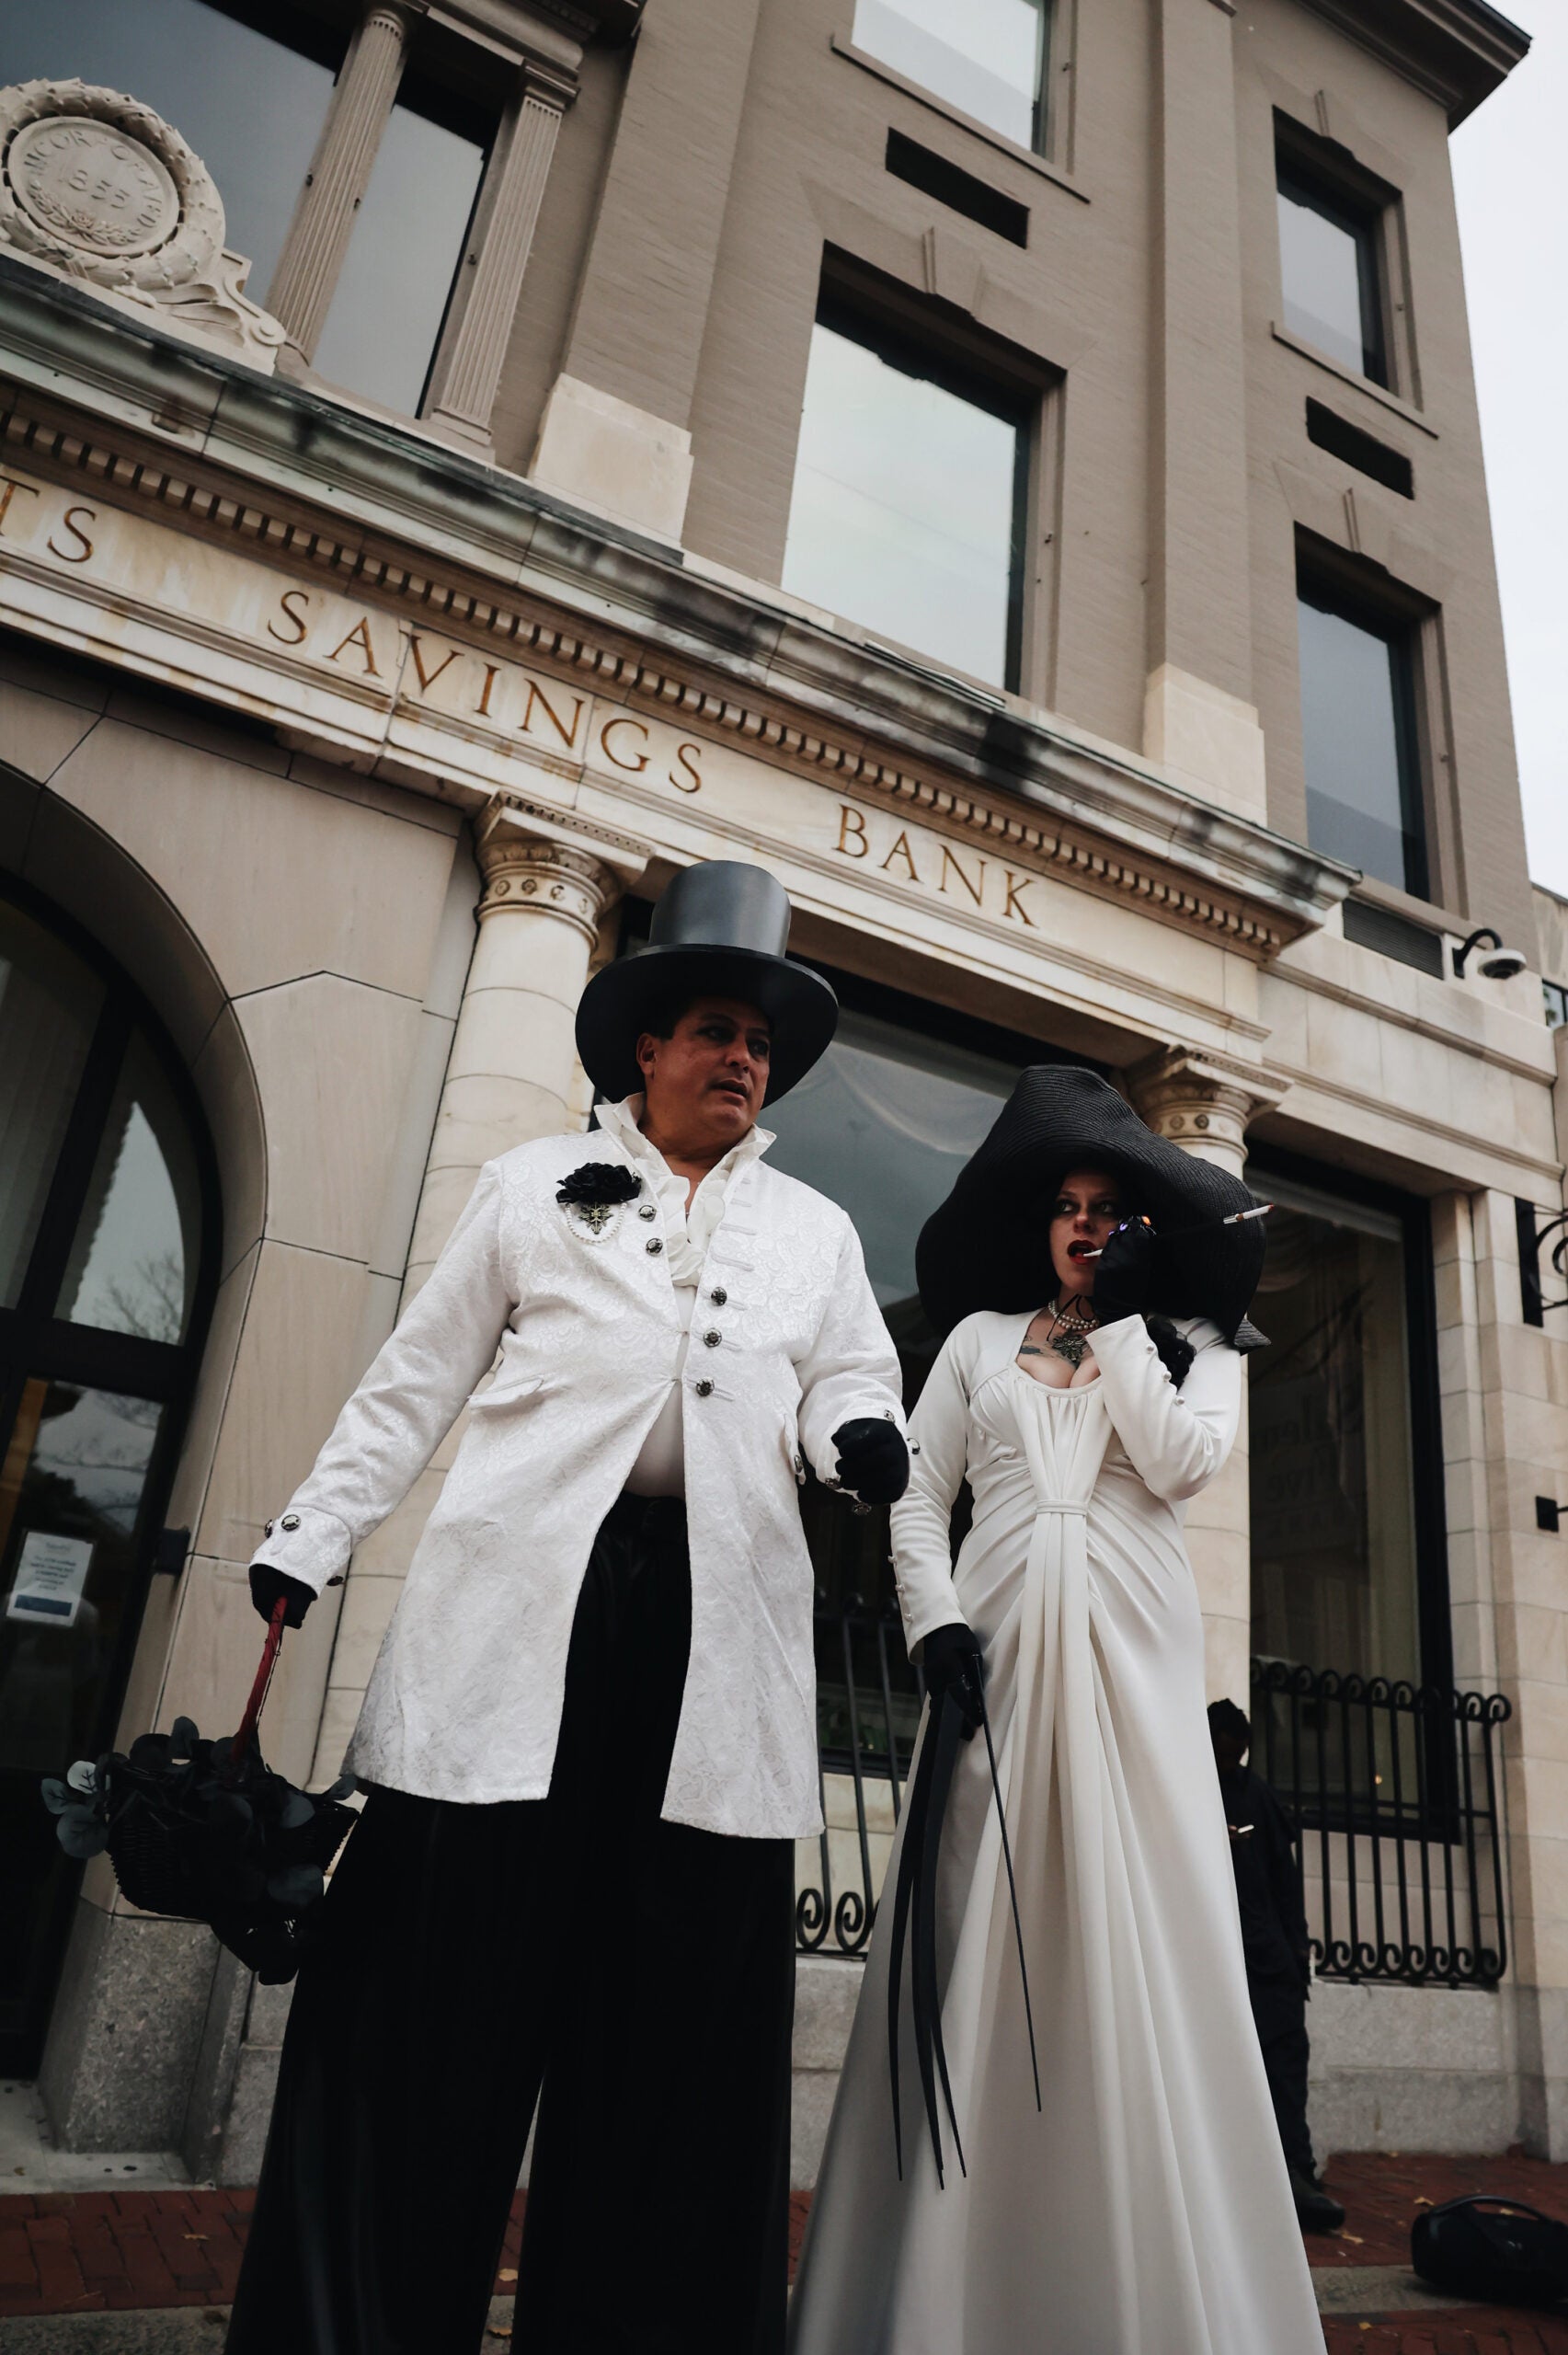 Costumes are seen prior to Halloween in downtown Salem, Mass.